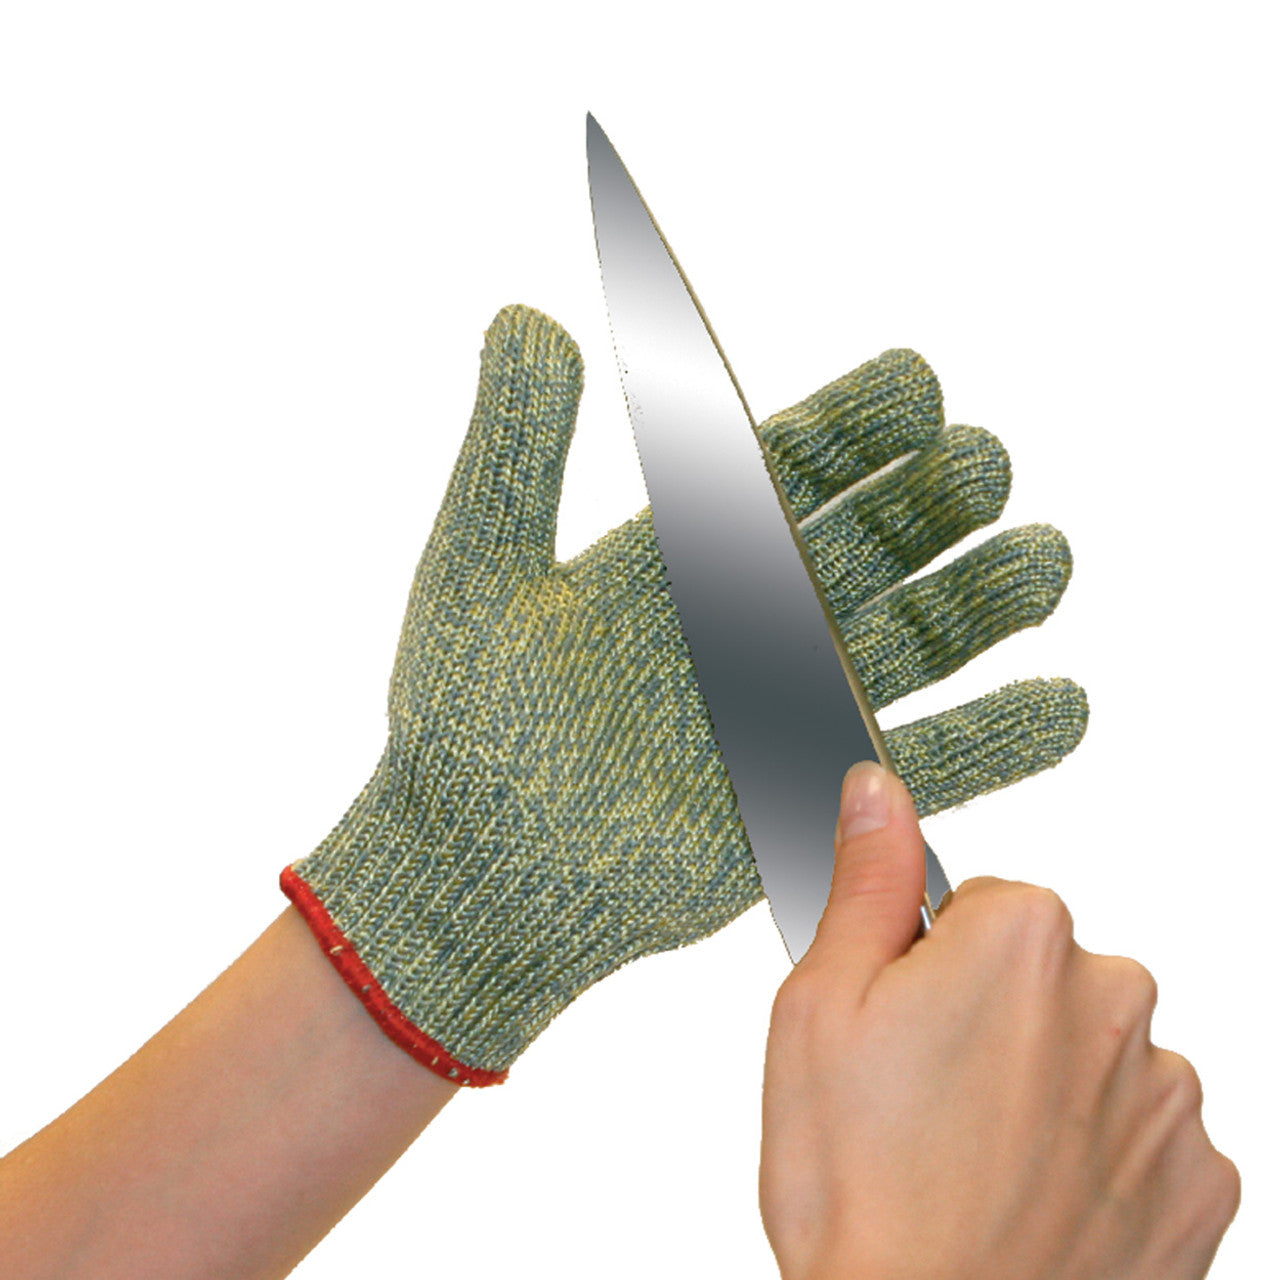 Cut Resistant Ambidextrous Glove - My Tools for Living℠ Retail Store